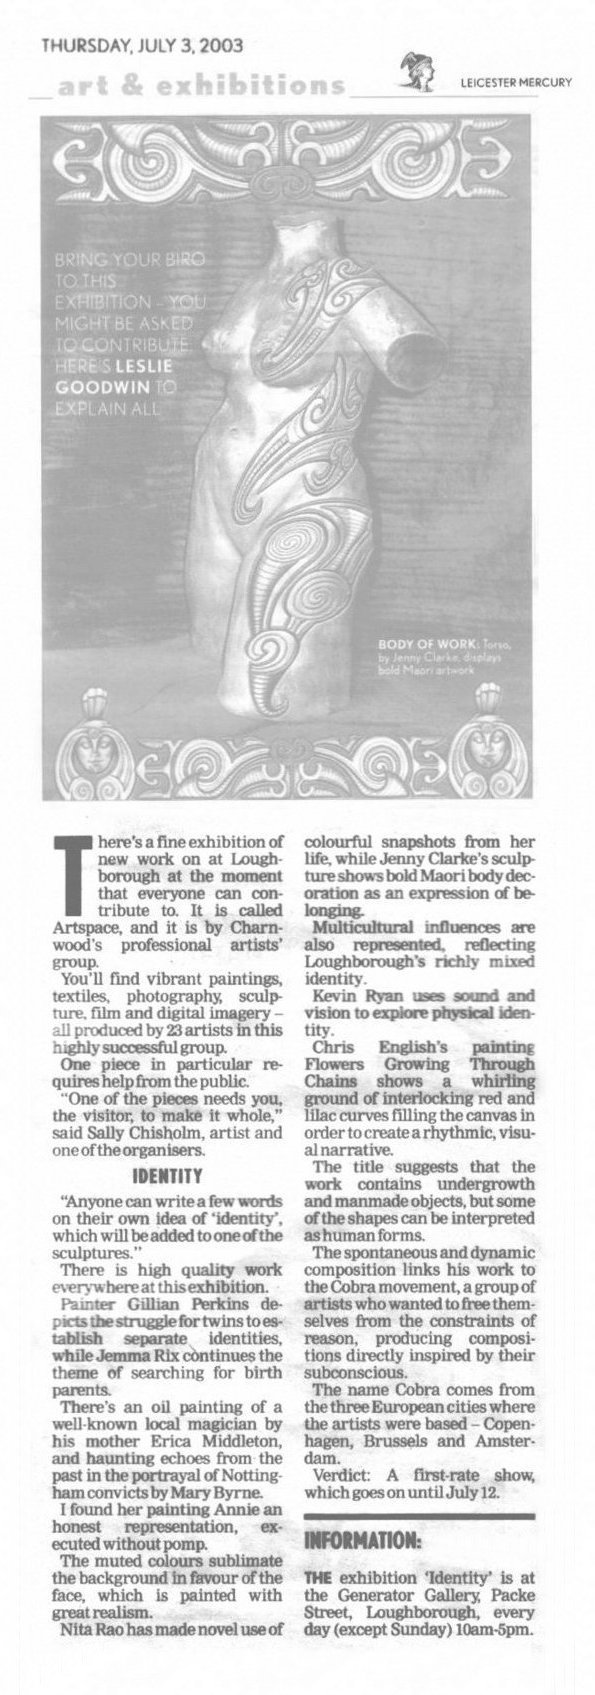 Artspace IDENTITY EXHIBITION Press cutting 2003
                                 from LEICESTER Mercury